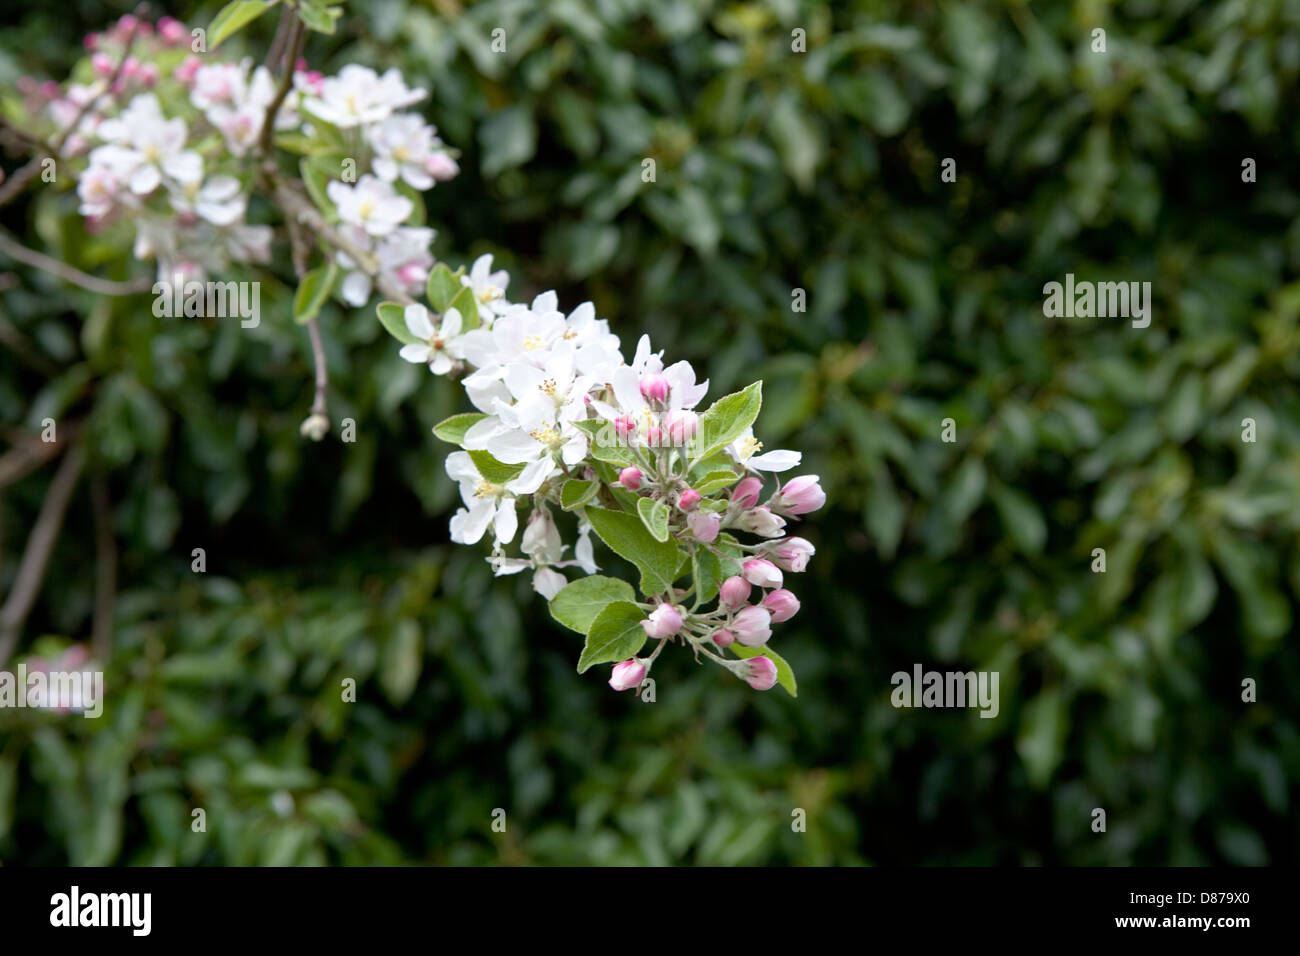 Apple blossom growing against a leafy hedge in an English garden in springtime. Stock Photo